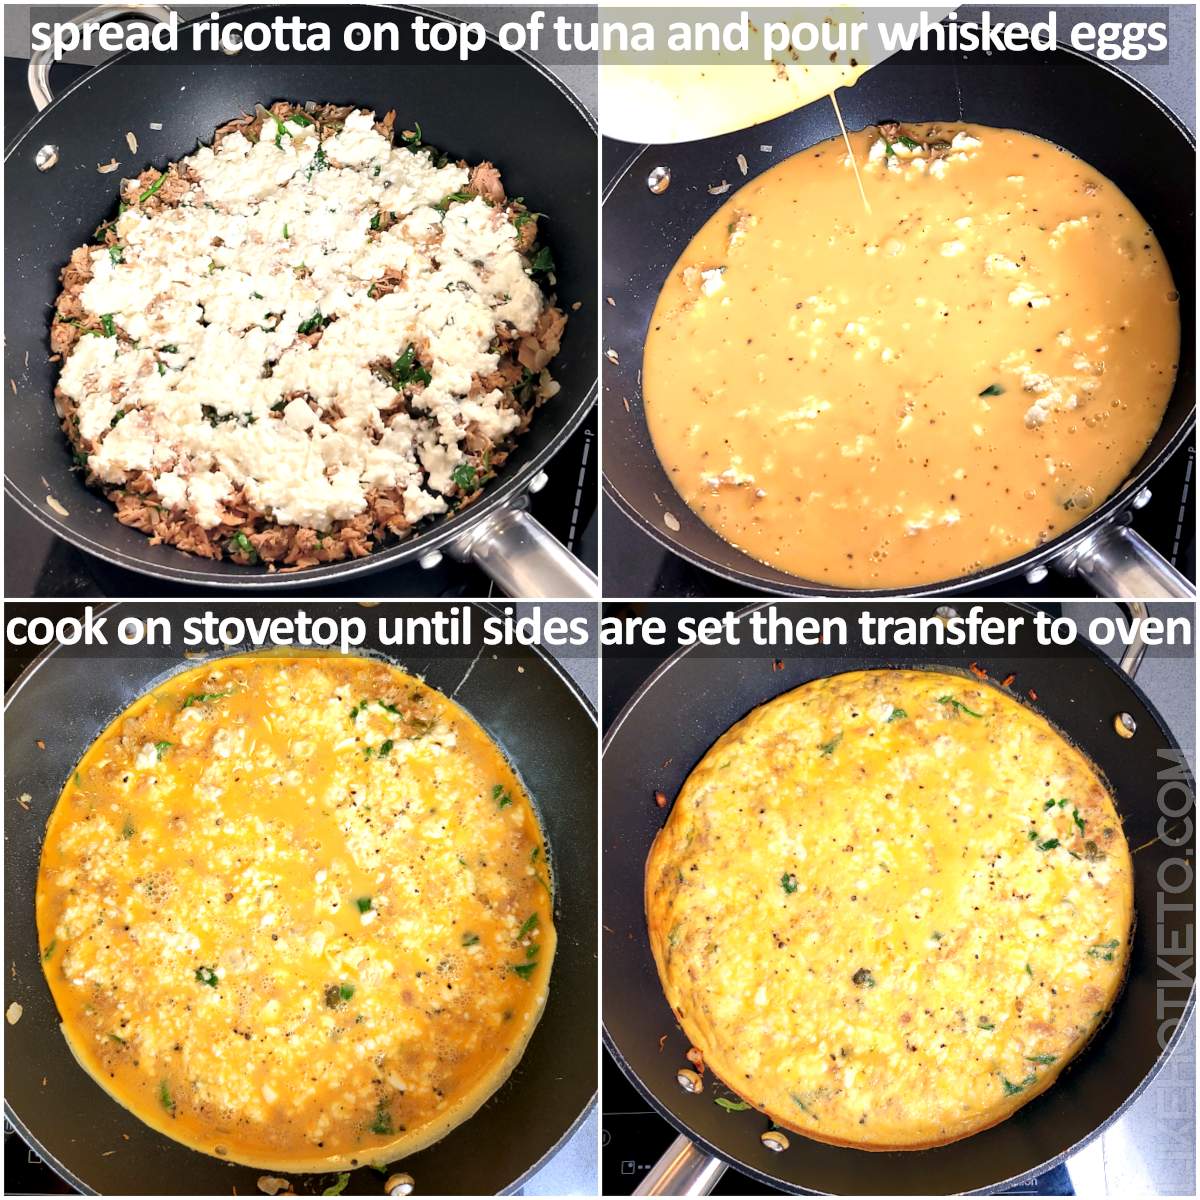 Spreading ricotta on top of sutéd tuna and veggies, and adding the egg mixture for the frittata, plus the before and after frittata baking.